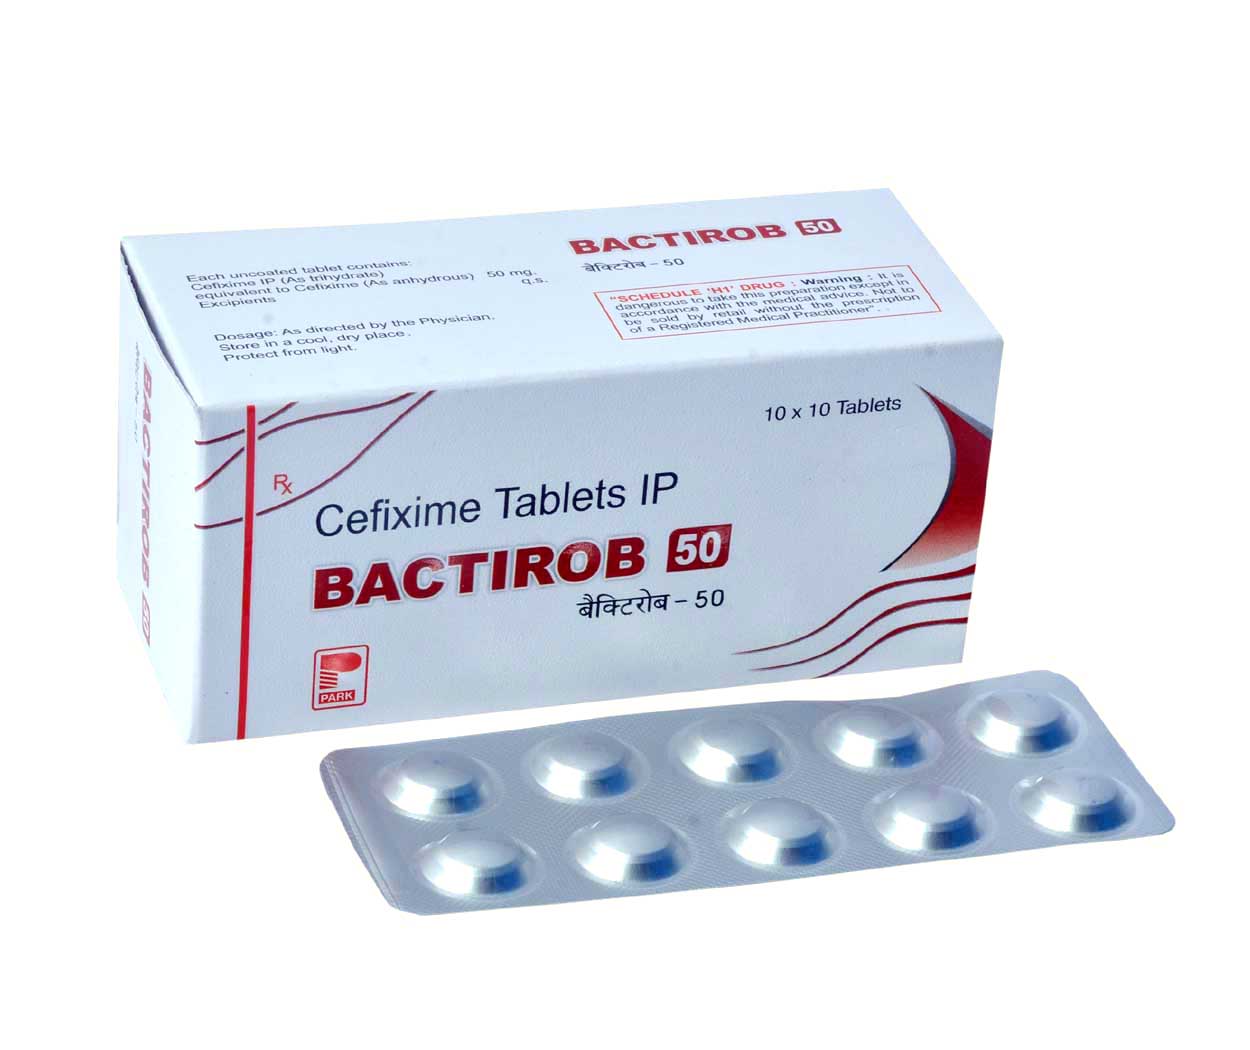 Product Name: BACTIROB 50, Compositions of BACTIROB 50 are Cefixime Tablets IP - Park Pharmaceuticals